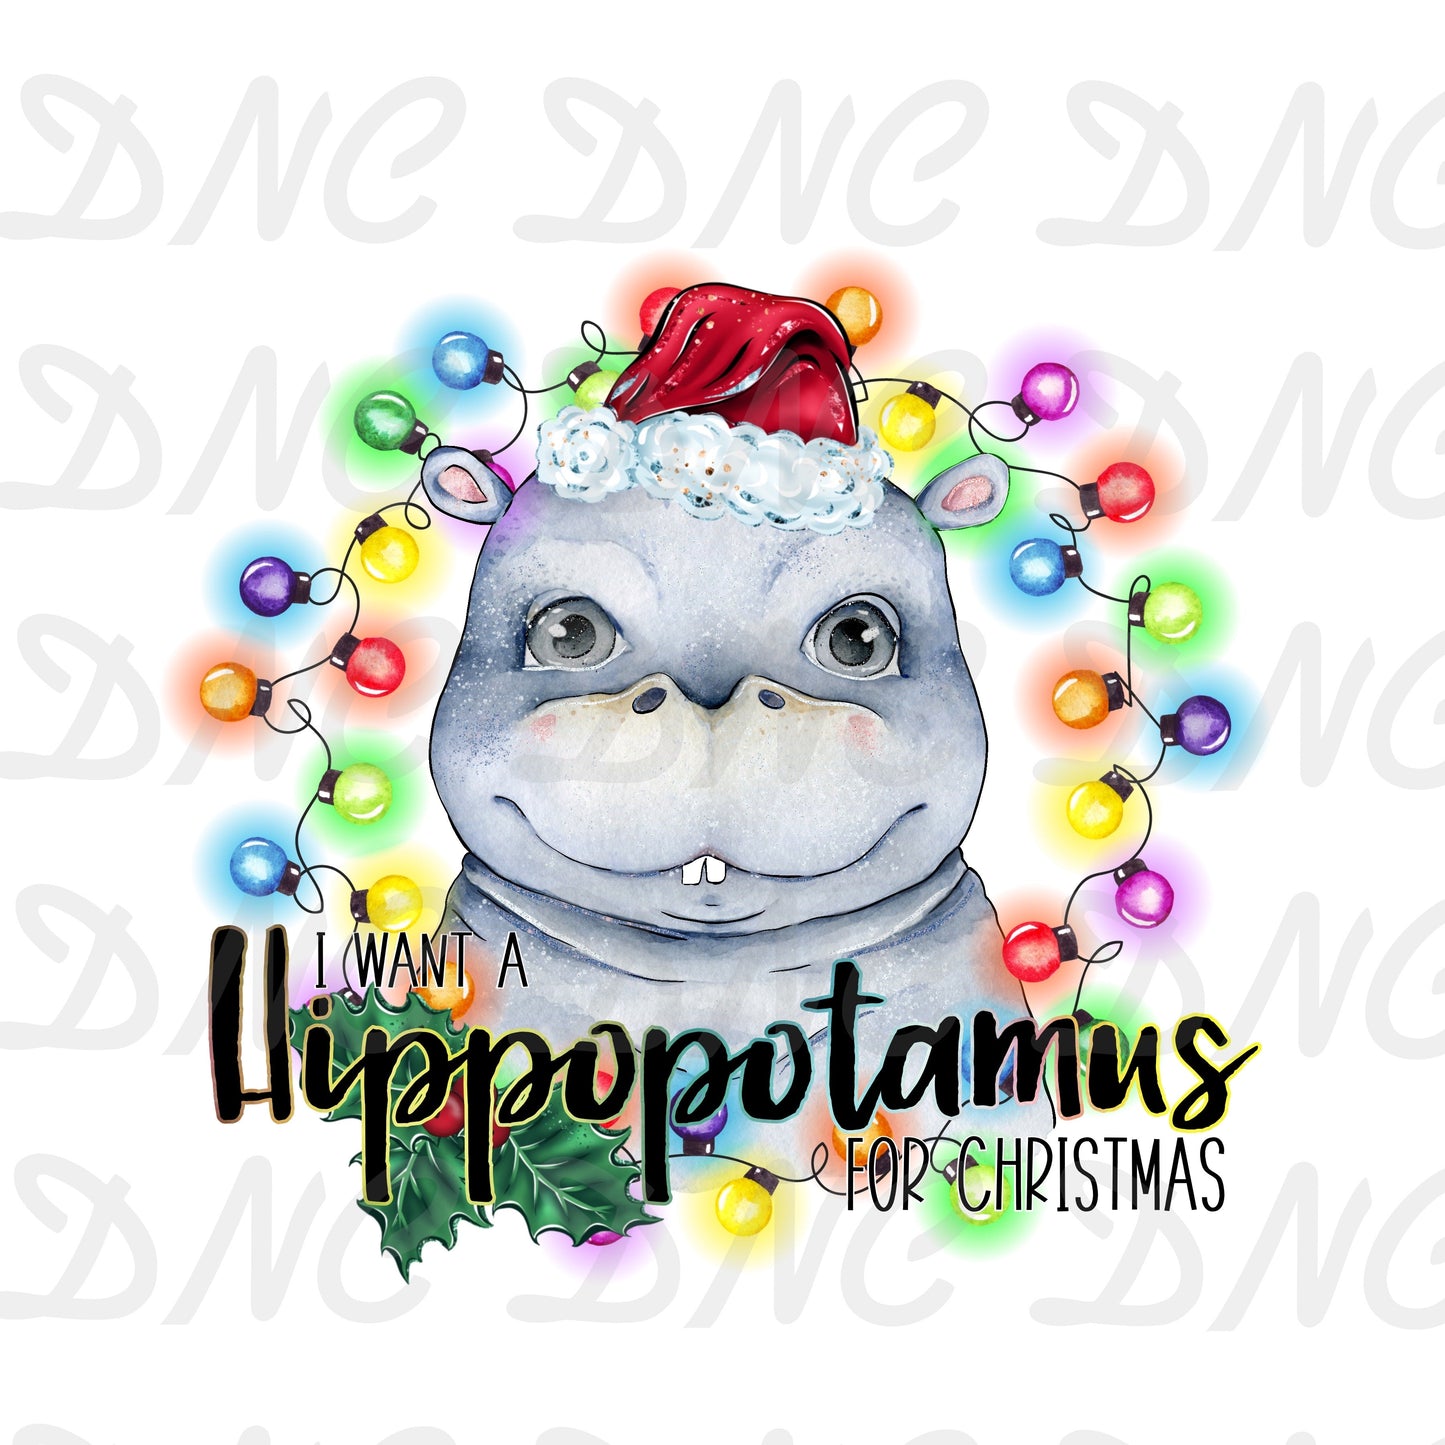 Hippopotamus for christmas with teeth - Sublimation